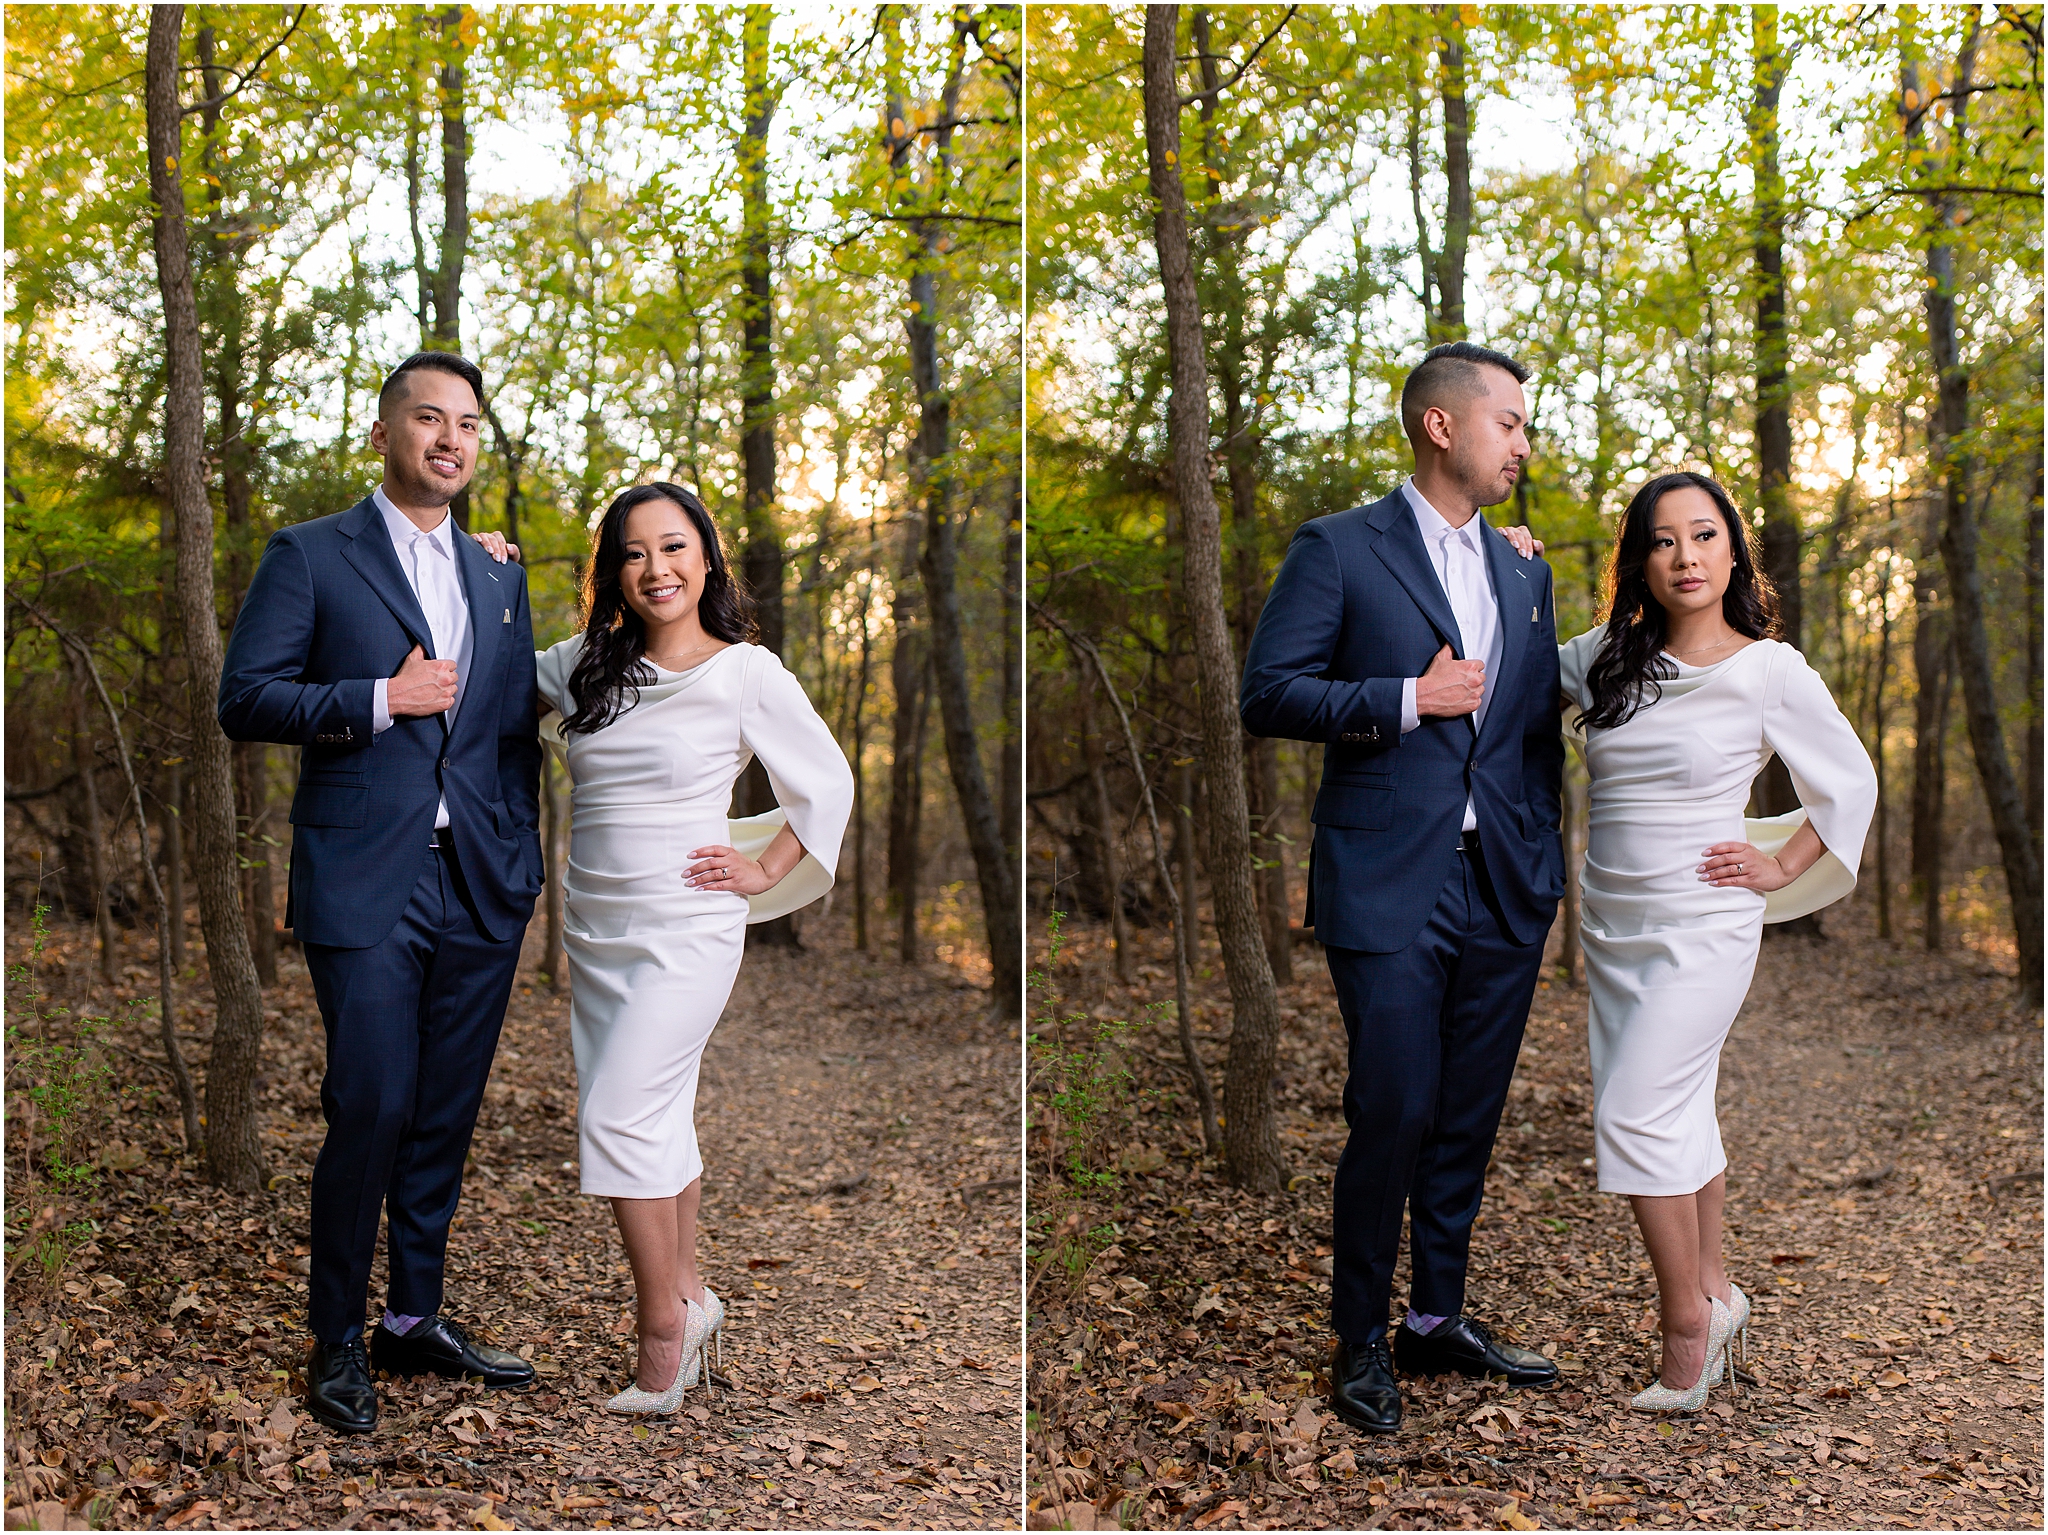 Dallas engagement session with man and woman standing in the woods captured by Dallas wedding photographer